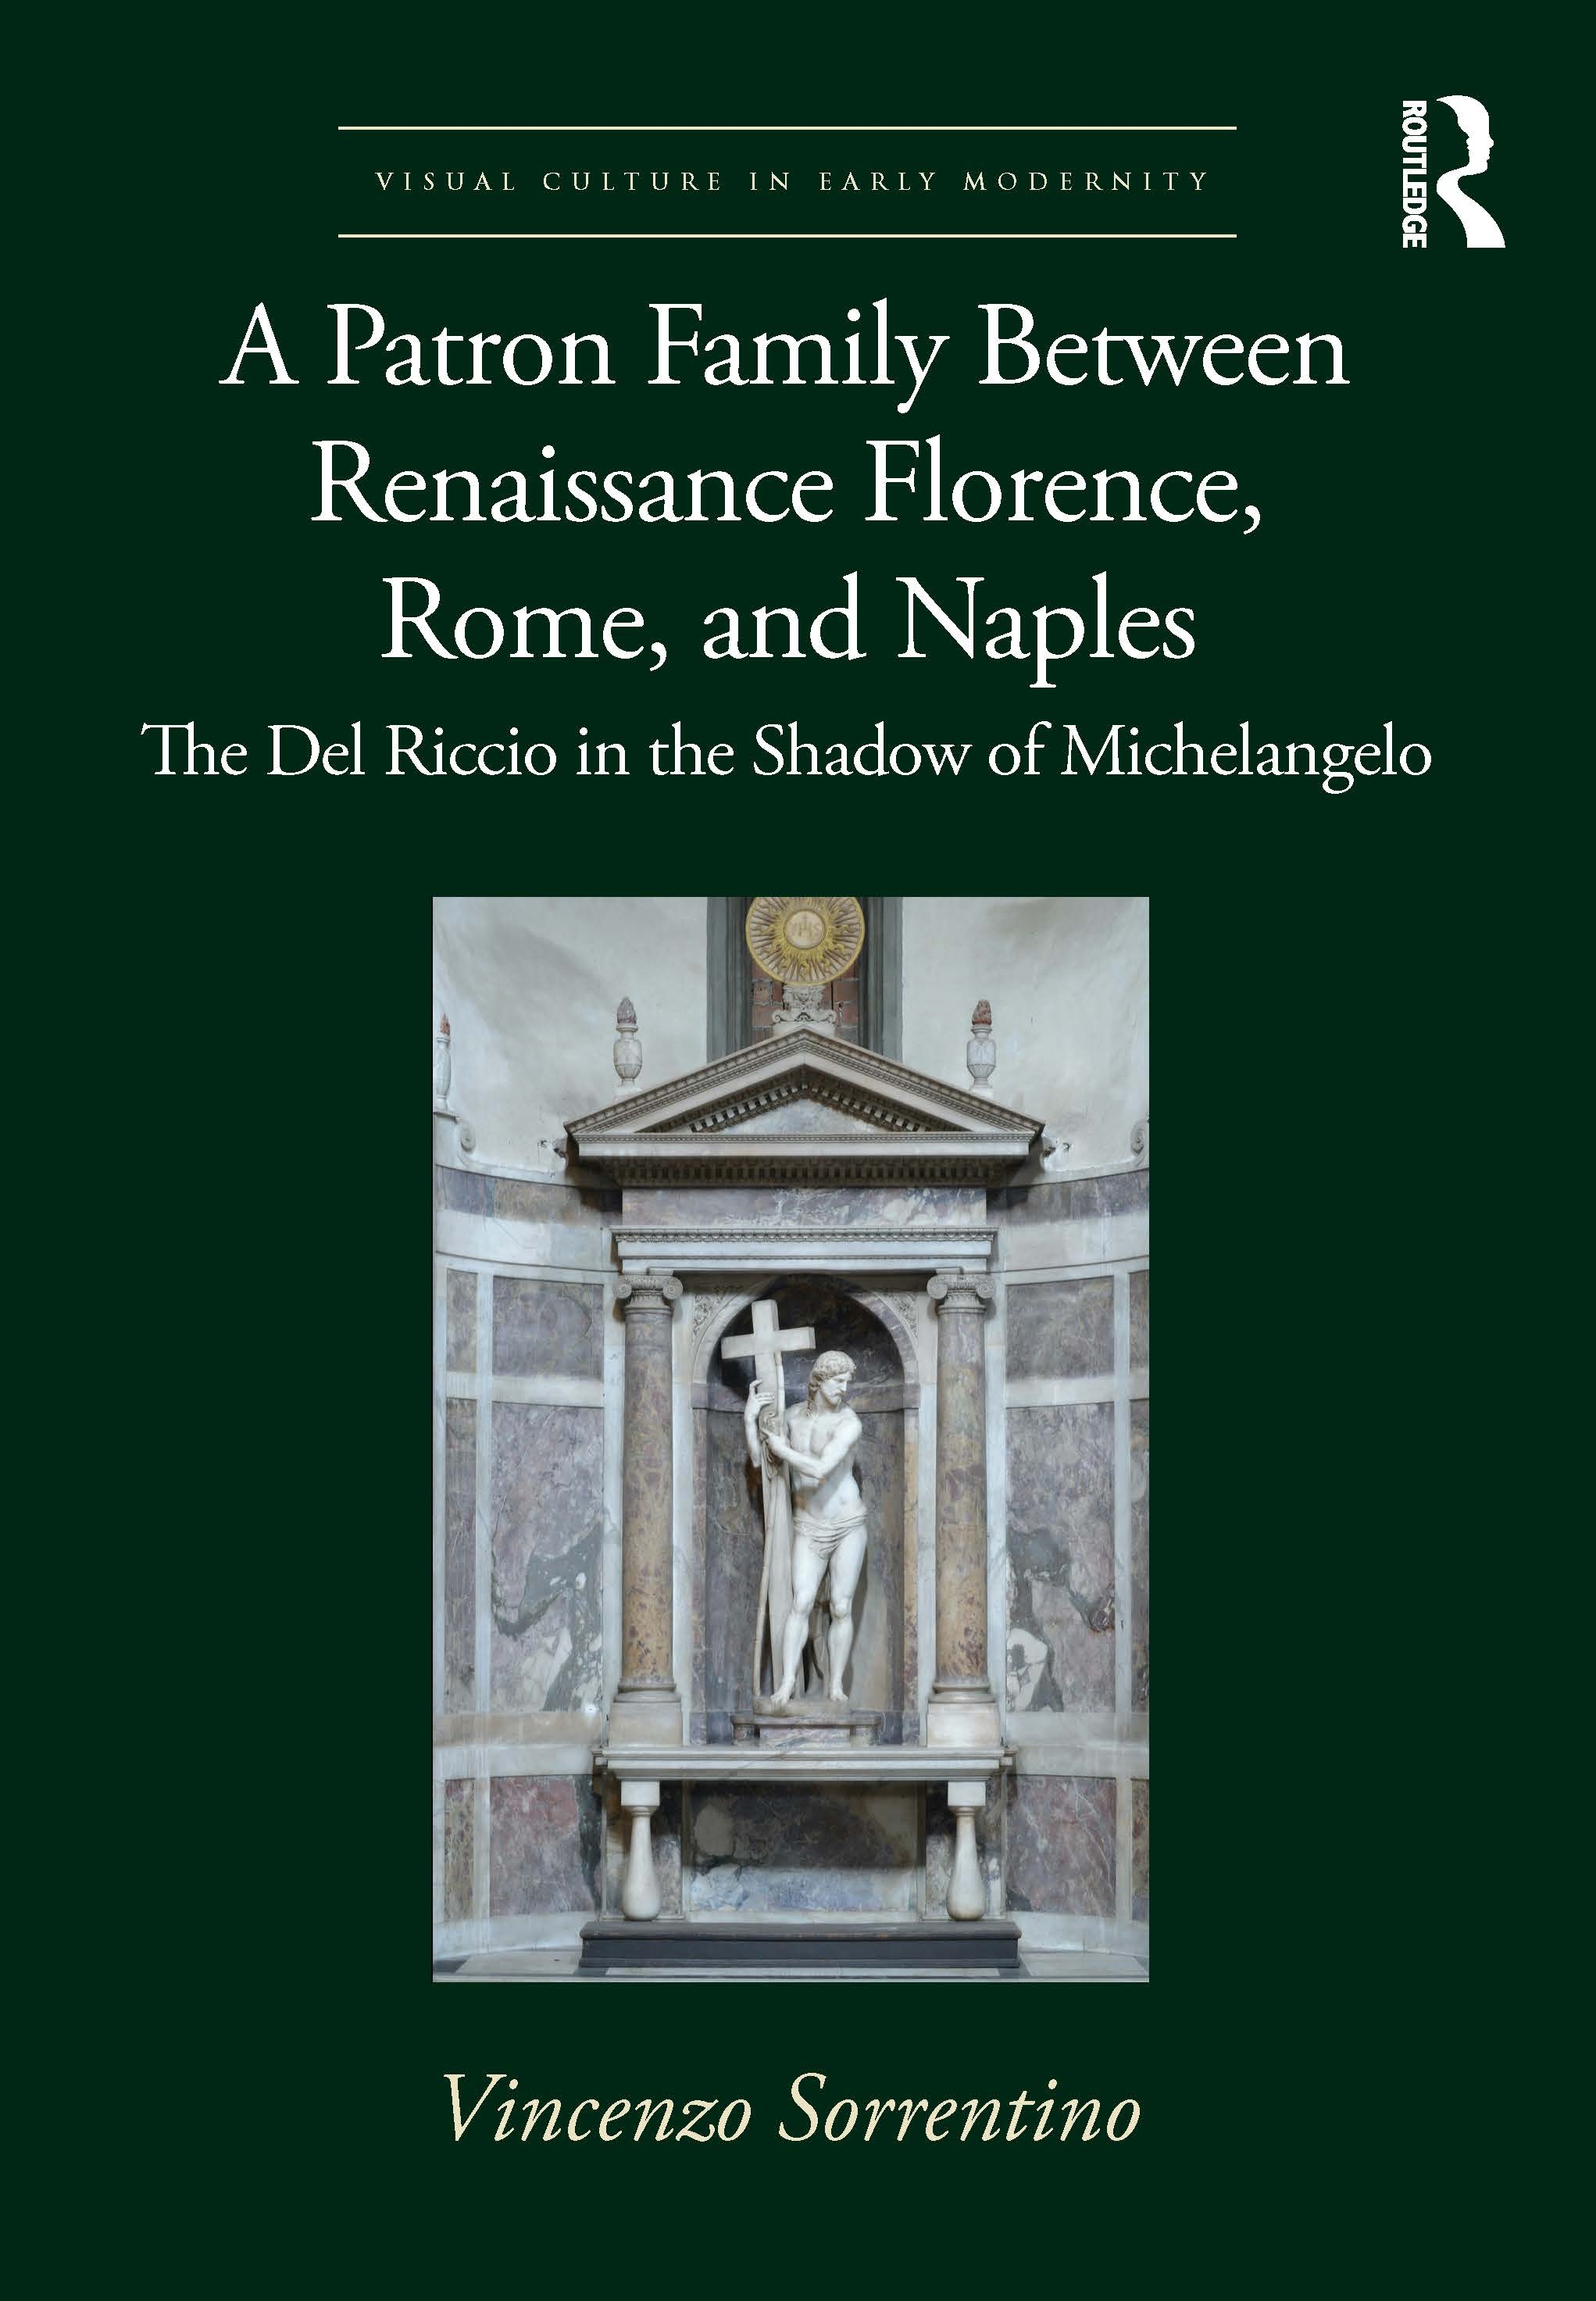 A A Patron Family Between Renaissance Florence, Rome, and Naples: The del Riccio in the Shadow of Michelangelo